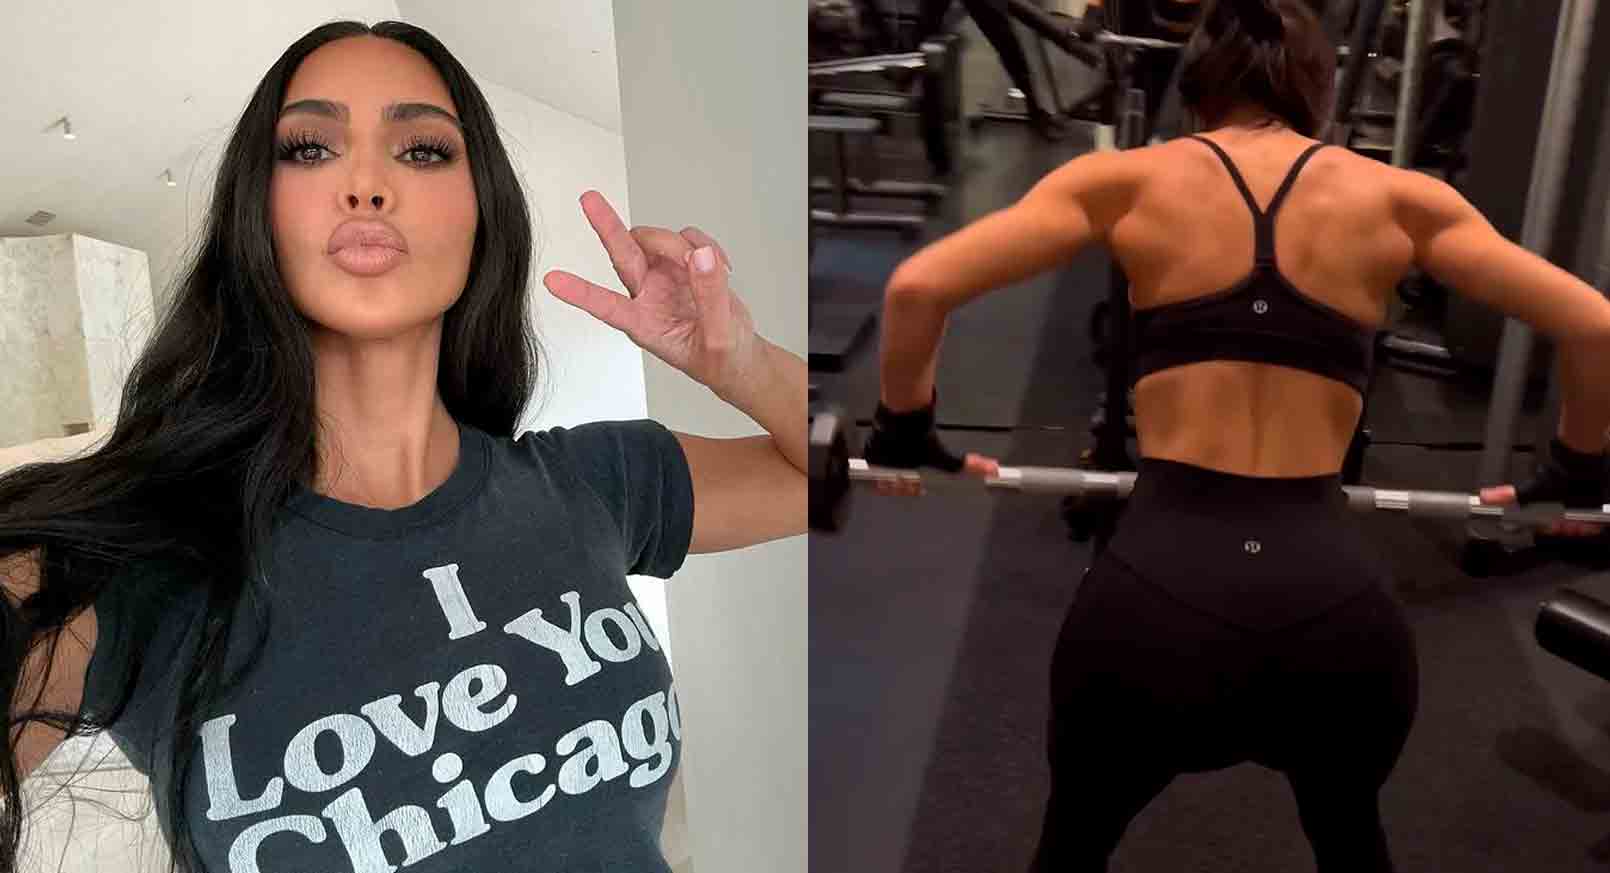 Video: Kim Kardashian Shows Off Defined Muscles in Intense Workout with Khloé Kardashian. Photo and video Instagram @khloehardashian